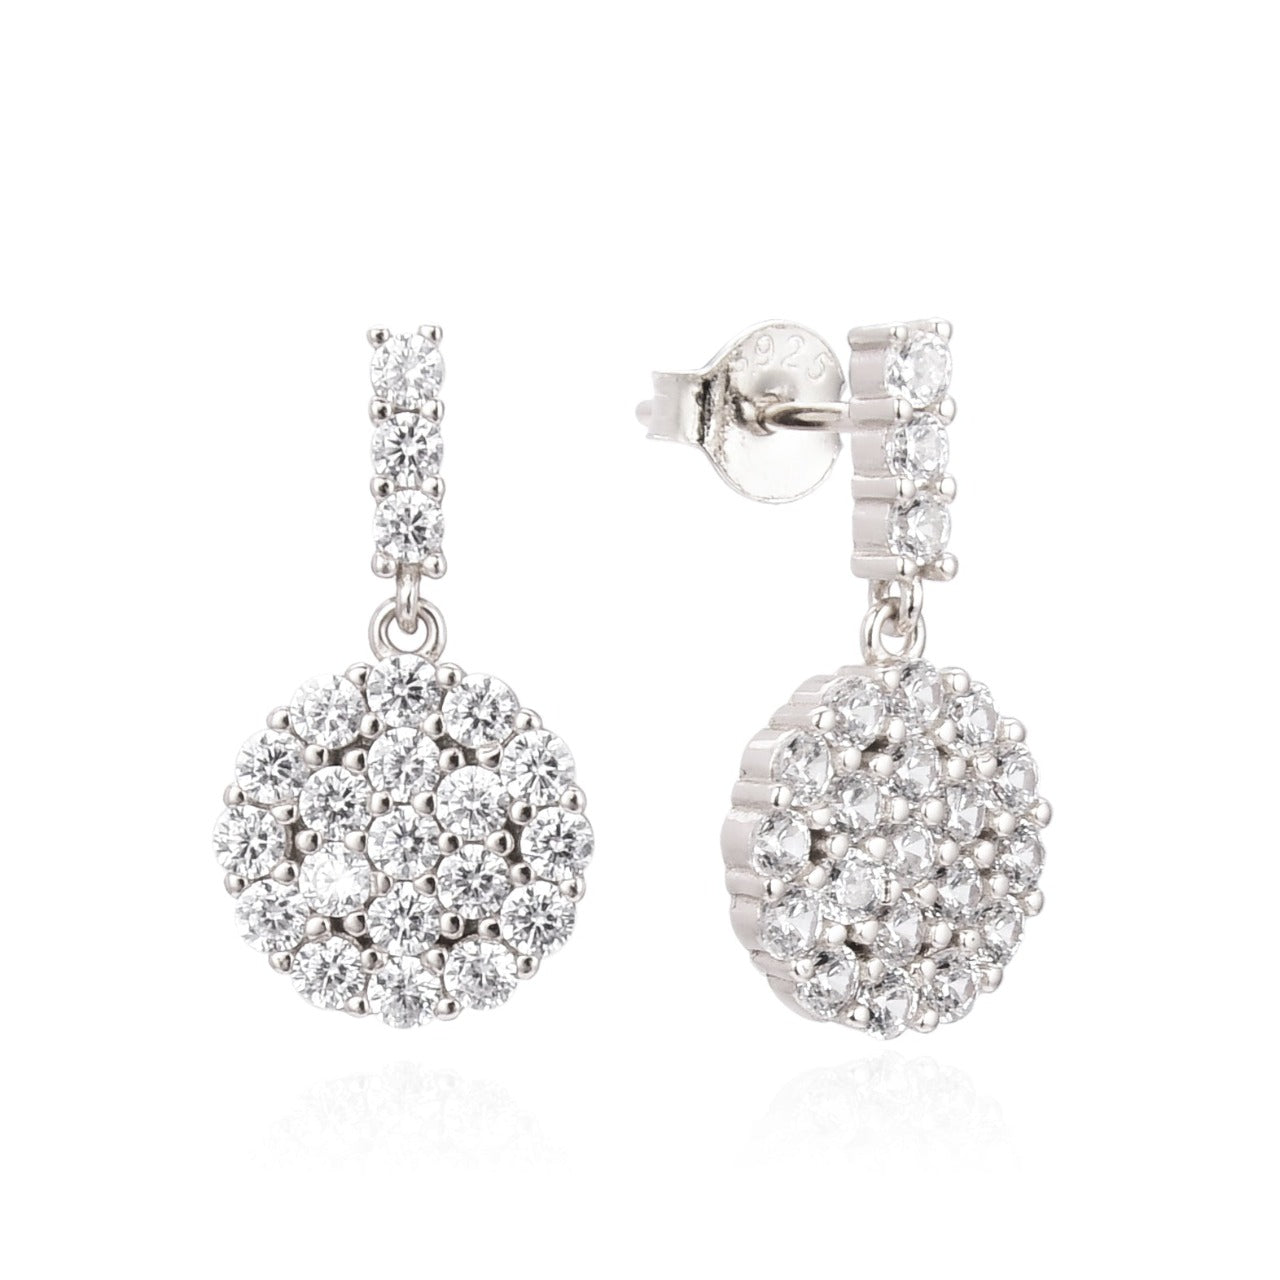 Kilkenny Silver Silver Beauty Drop Earrings  Sterling silver eye catching drop earrings with cubic zirconia stones. Gives you that extra sparkle.